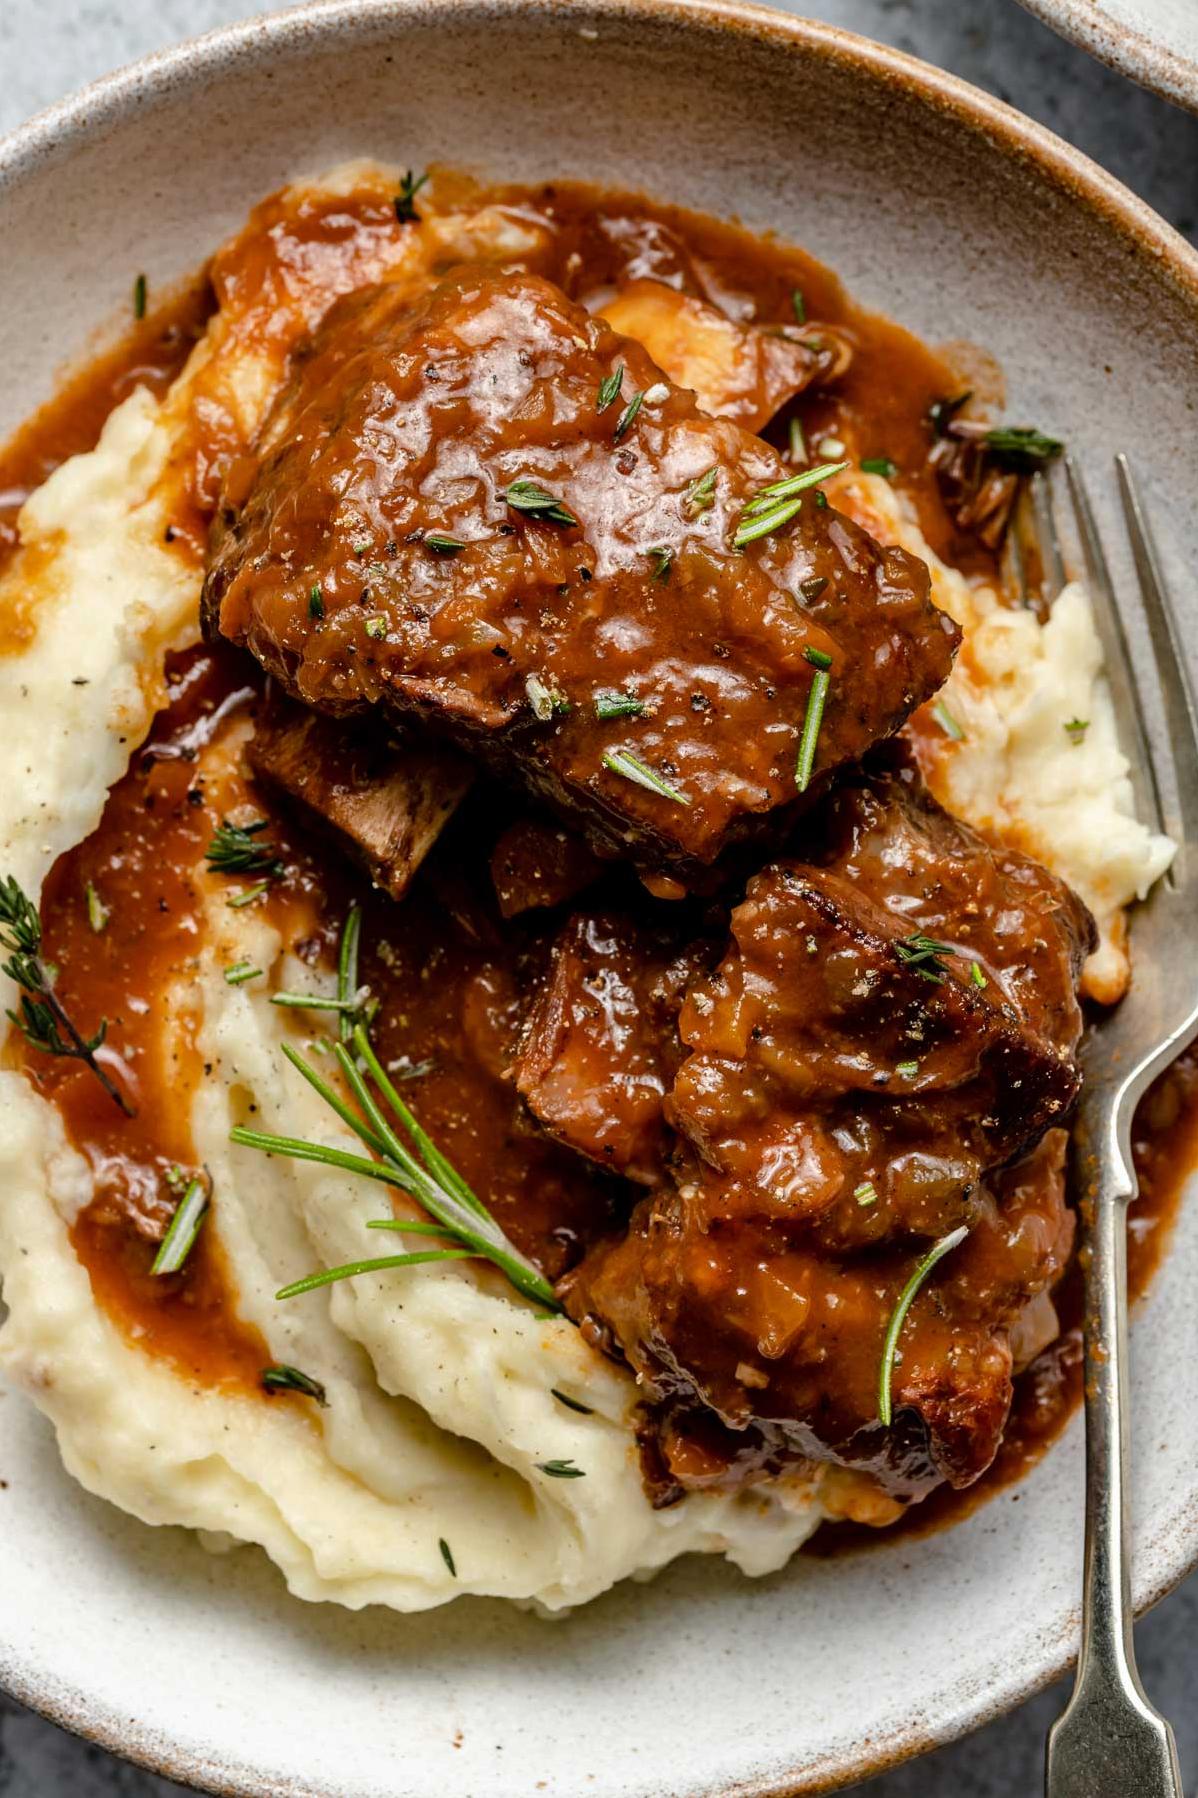  These short ribs are cooked low and slow in a full-bodied red wine sauce.